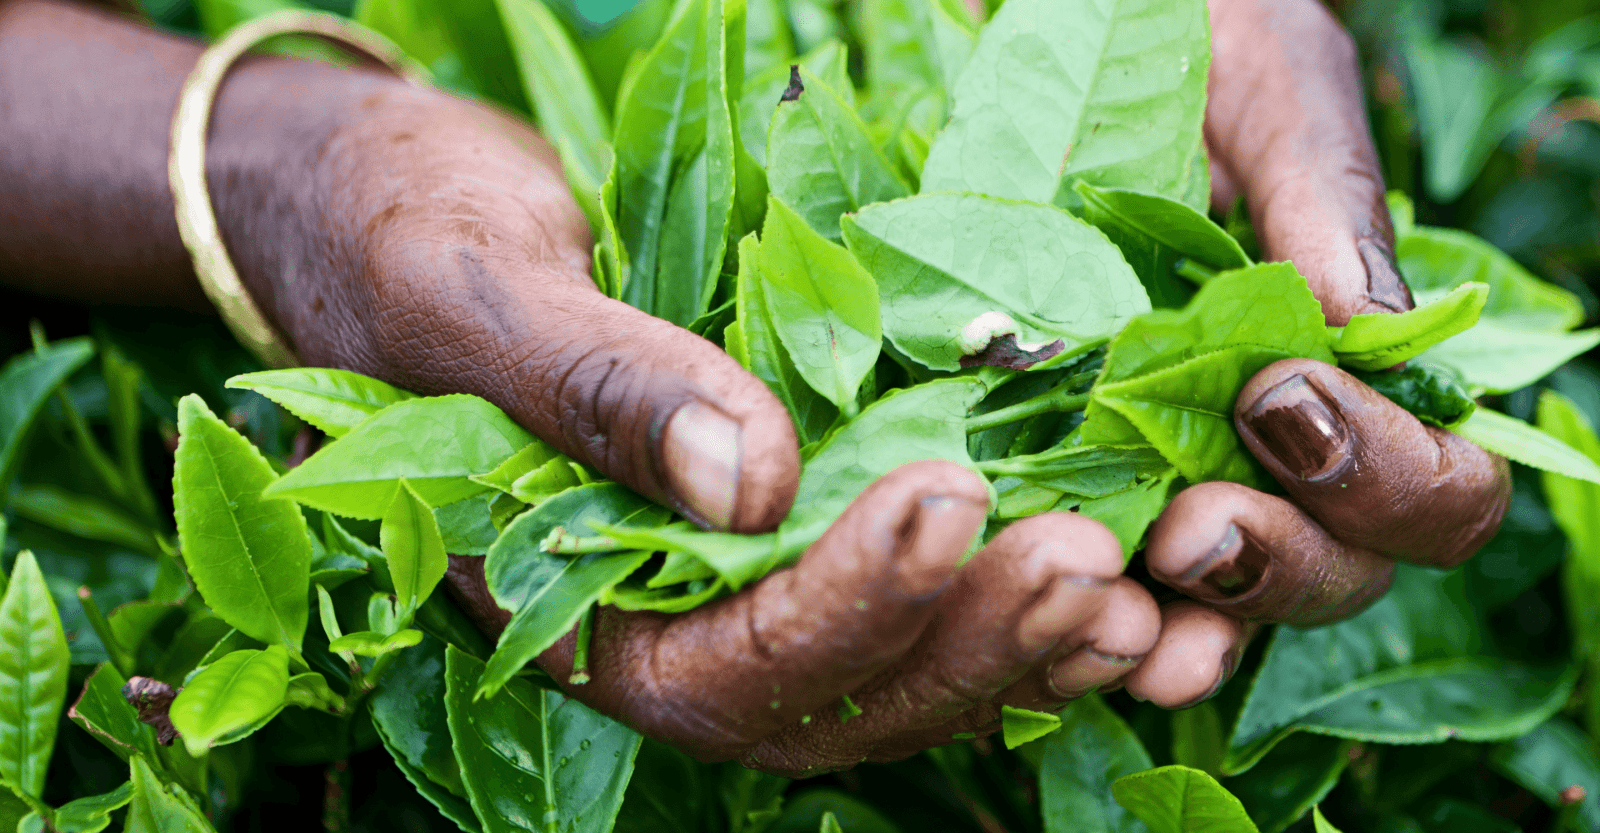 ProFound Enhancing Sustainable Sourcing